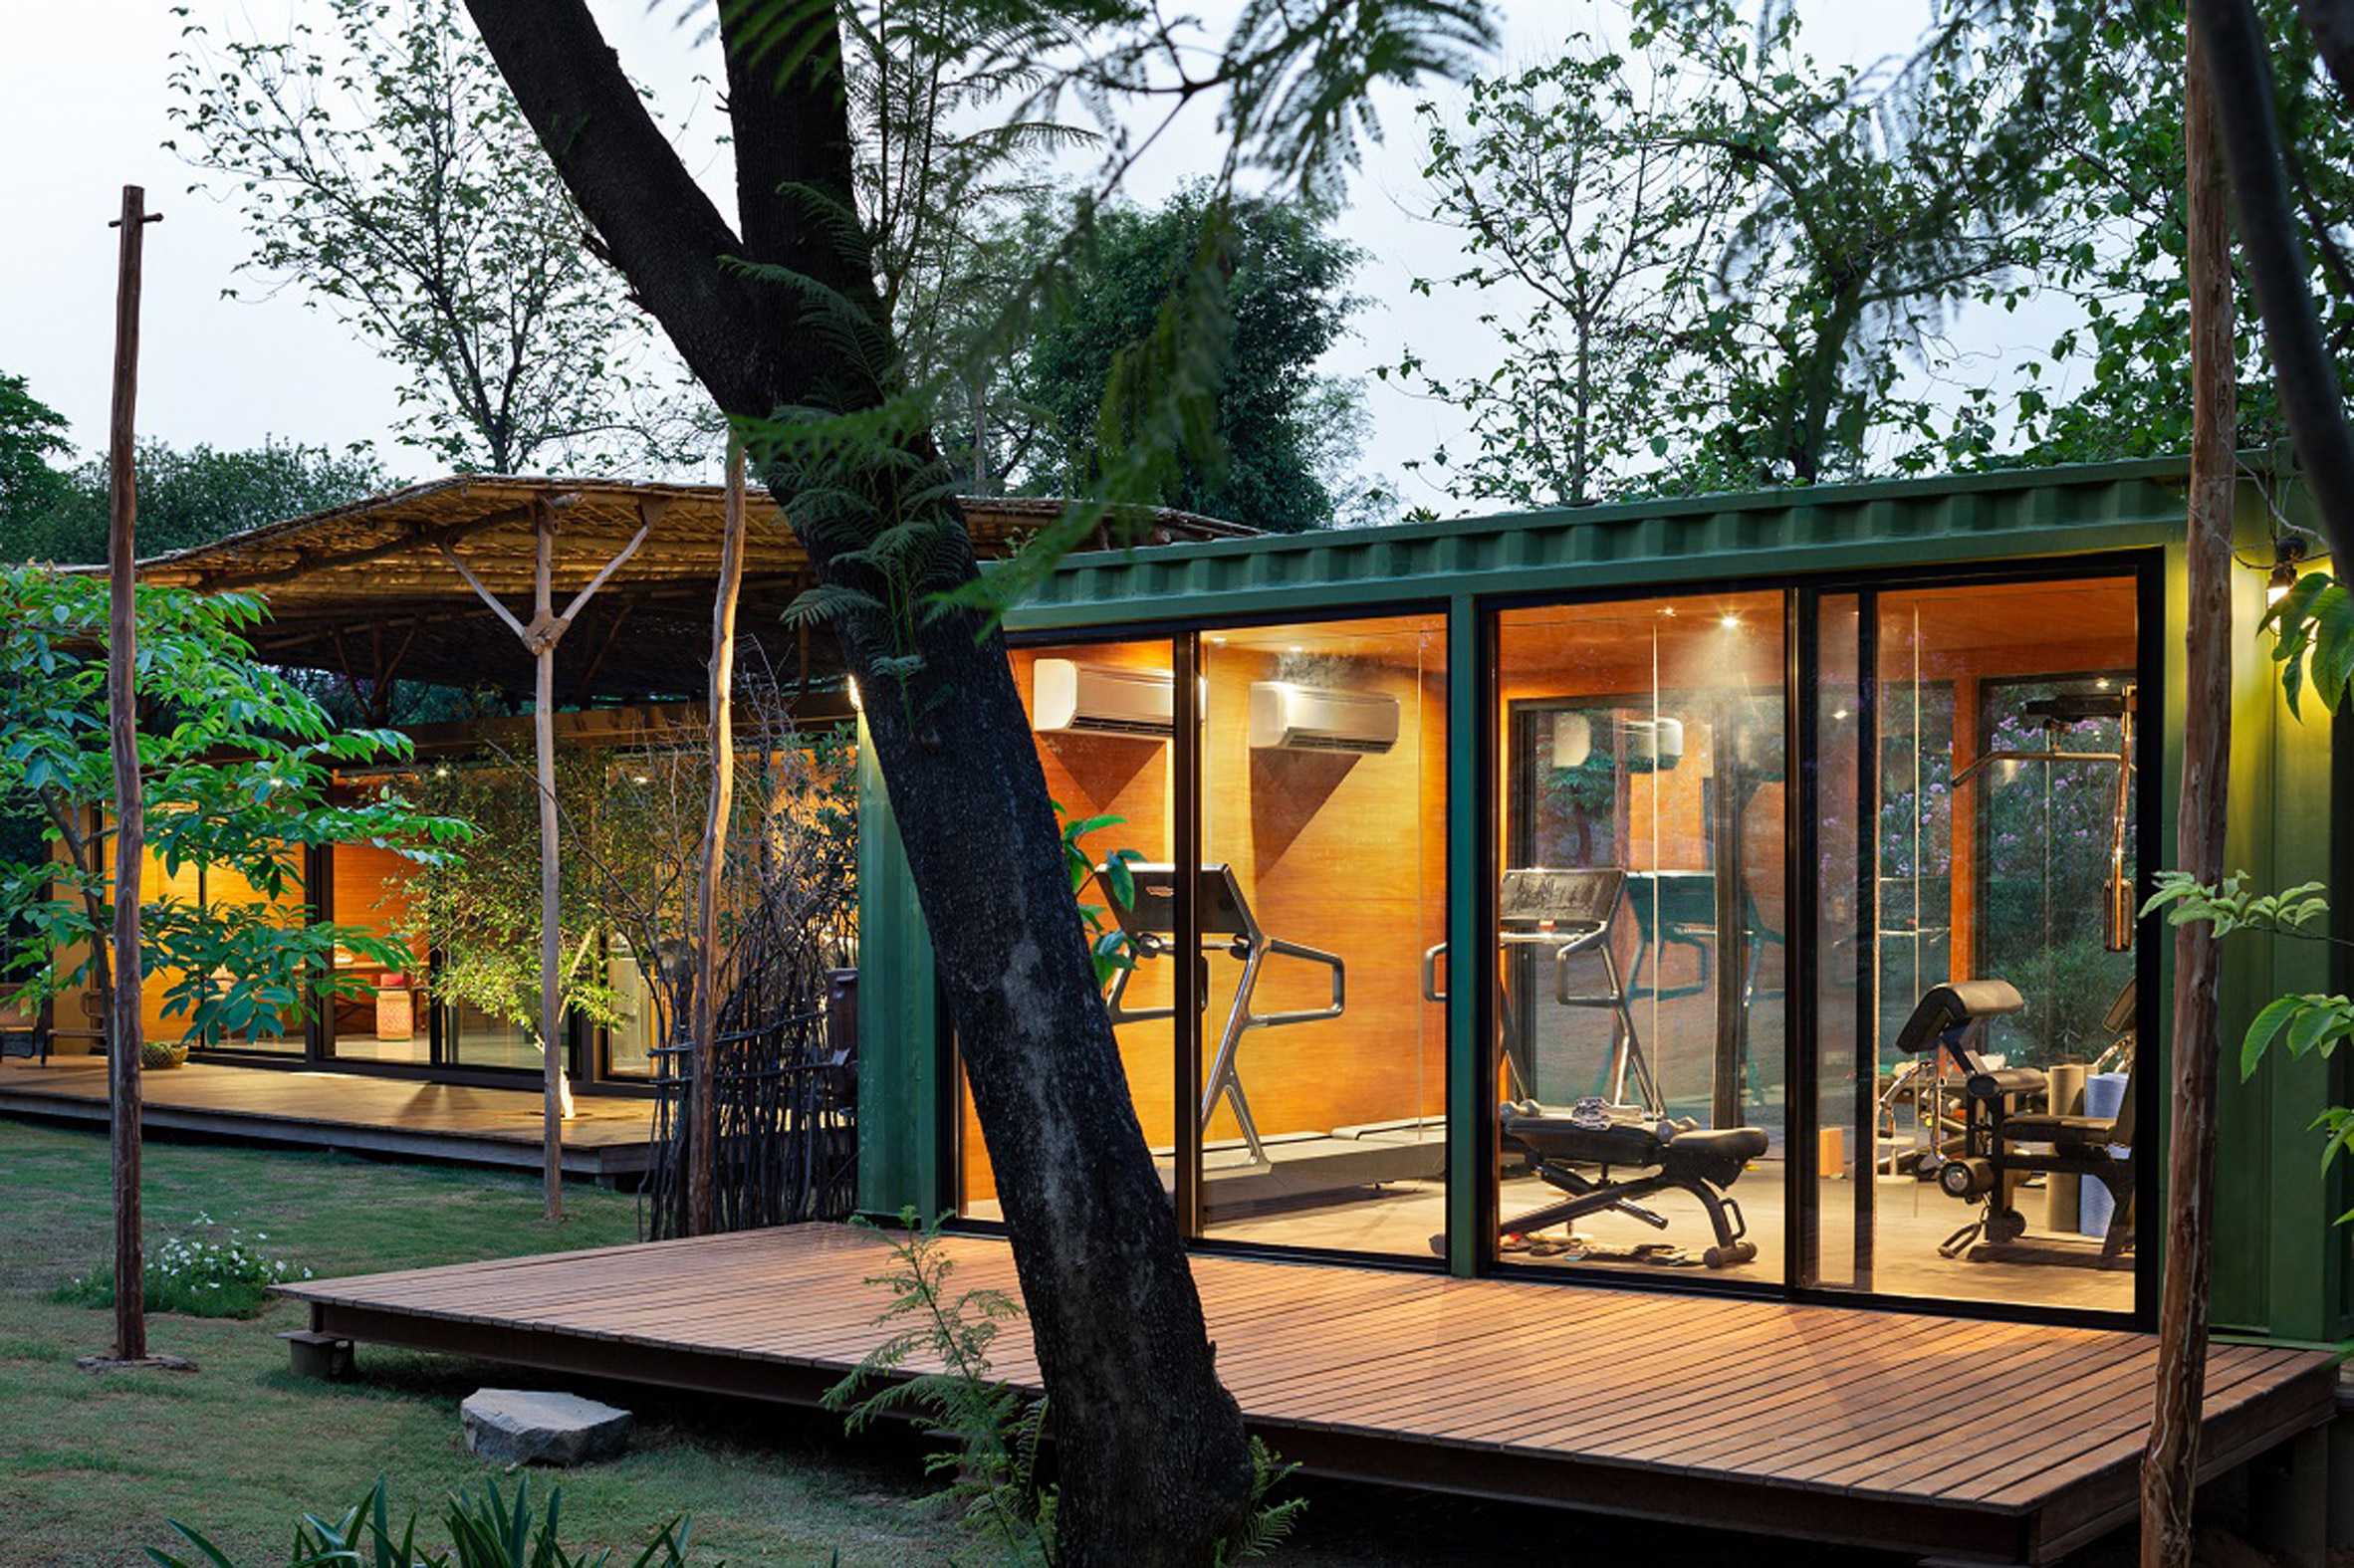 RSDA repurposes shipping containers to form home on Indian farm